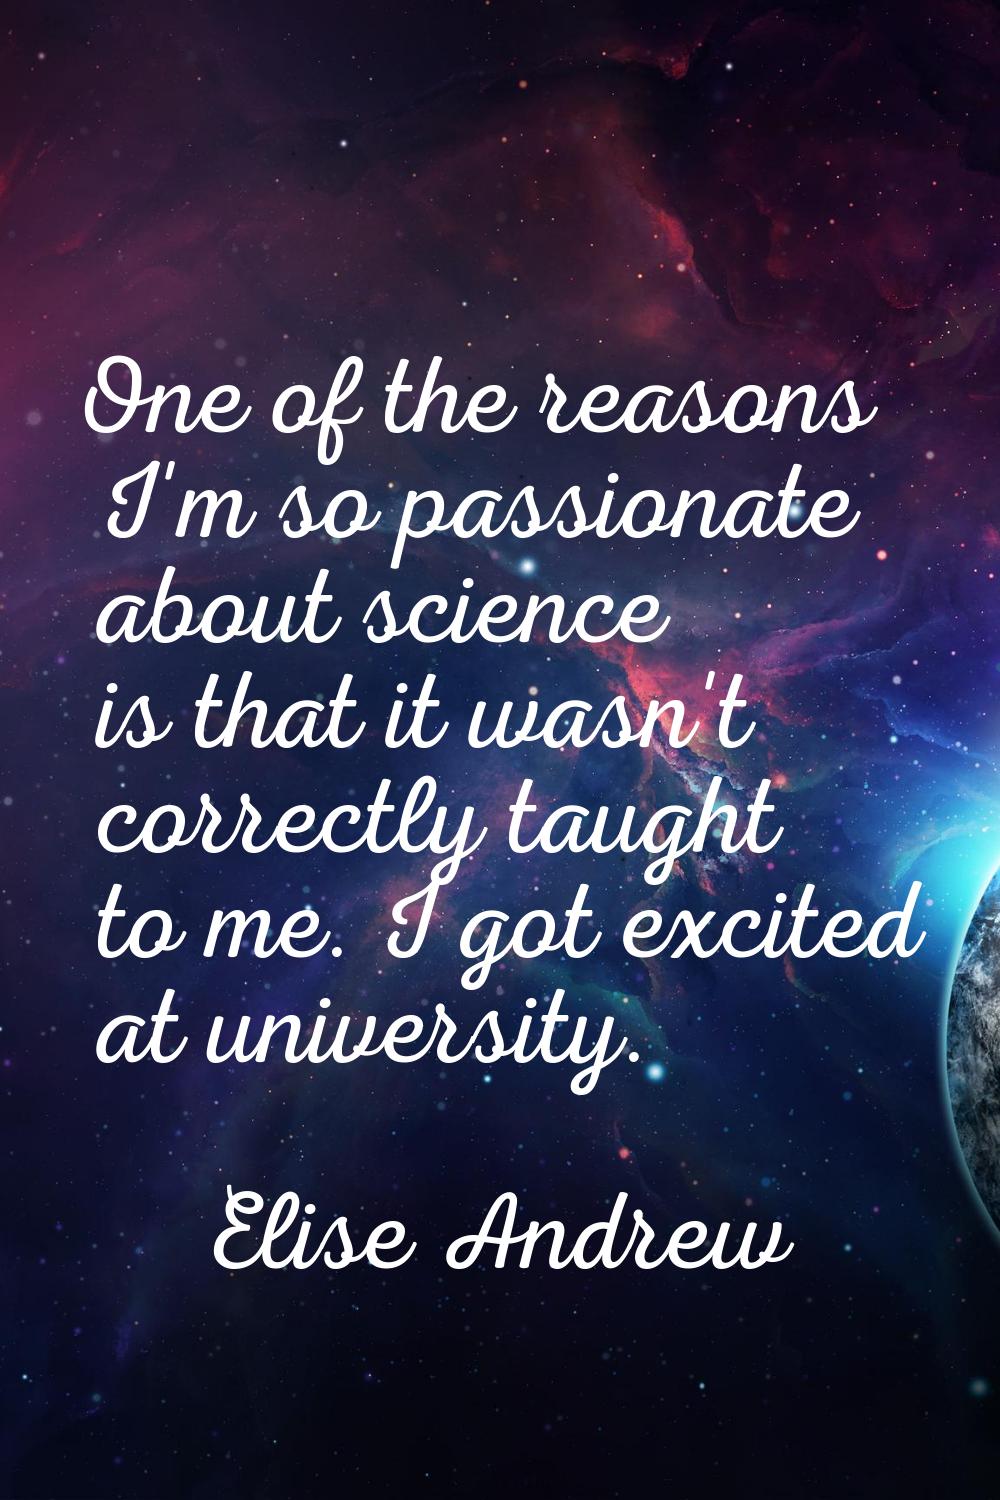 One of the reasons I'm so passionate about science is that it wasn't correctly taught to me. I got 